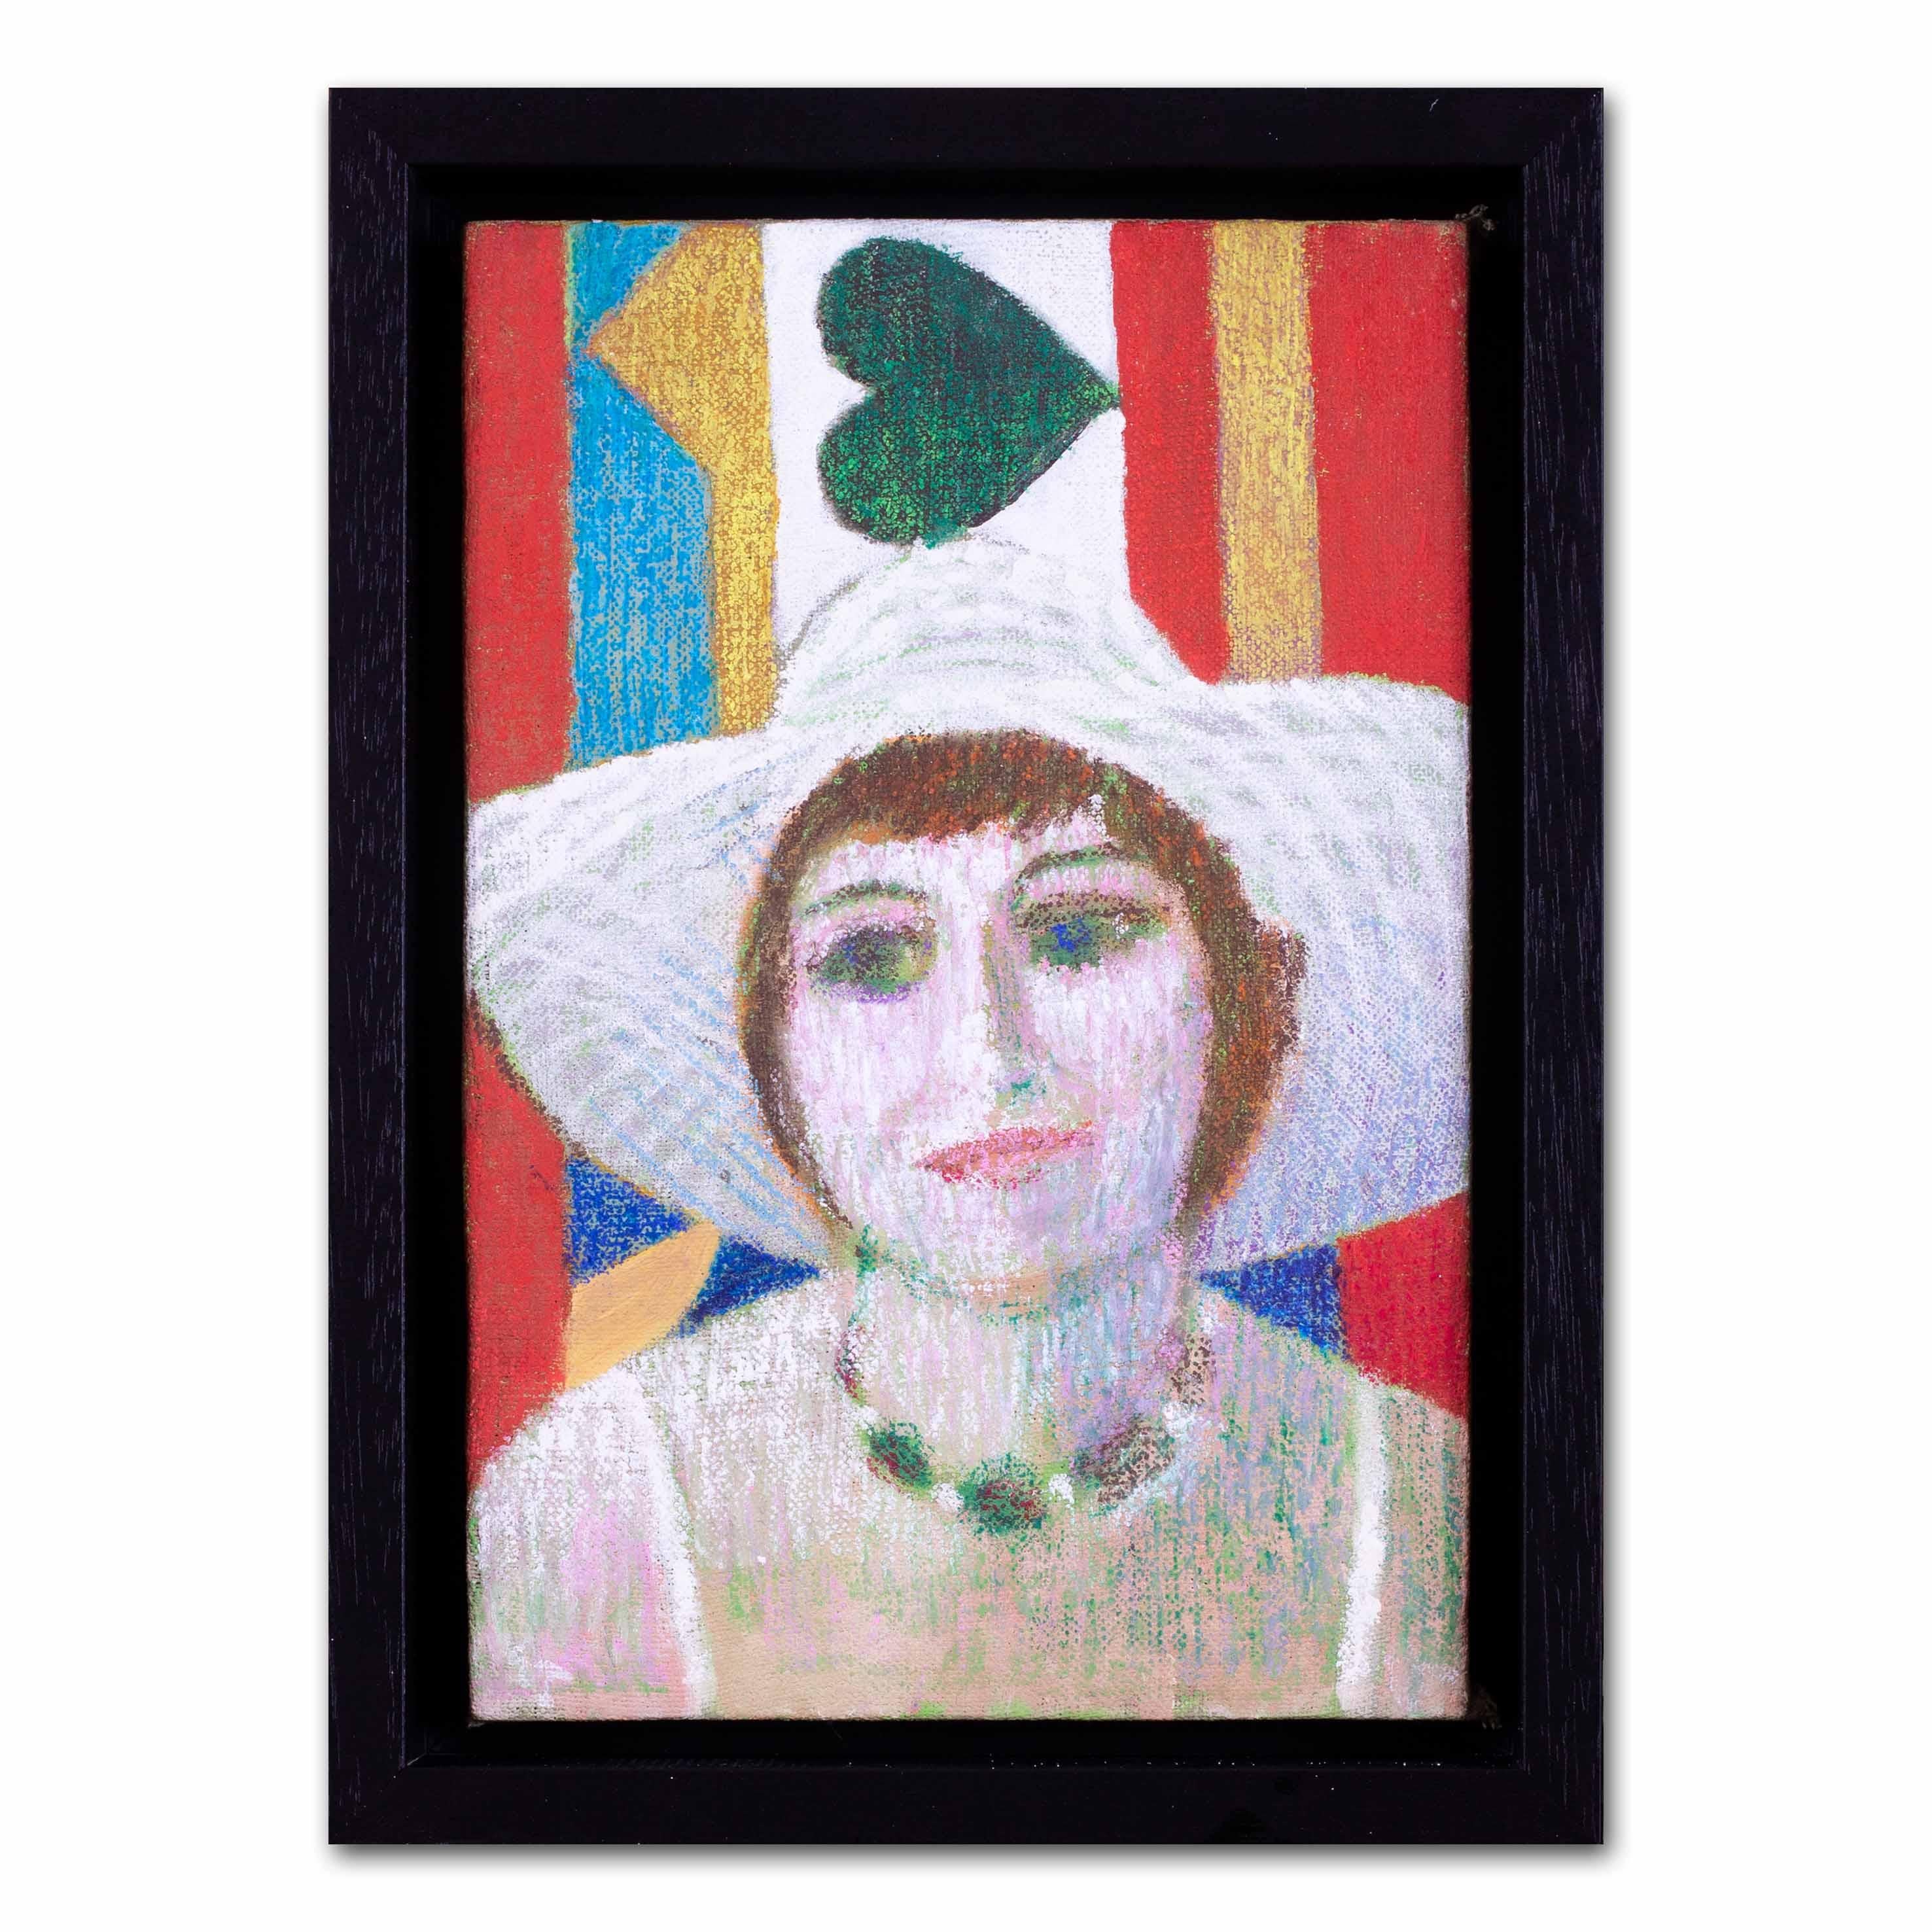 An elegant and intimate portrait of a young lady in a pale pink hat gazes out beyond the frame. She wears a simple white summer dress and a beaded necklace around her neck. Rich stripes of deep red, marine blue and ochre ground her in the image,